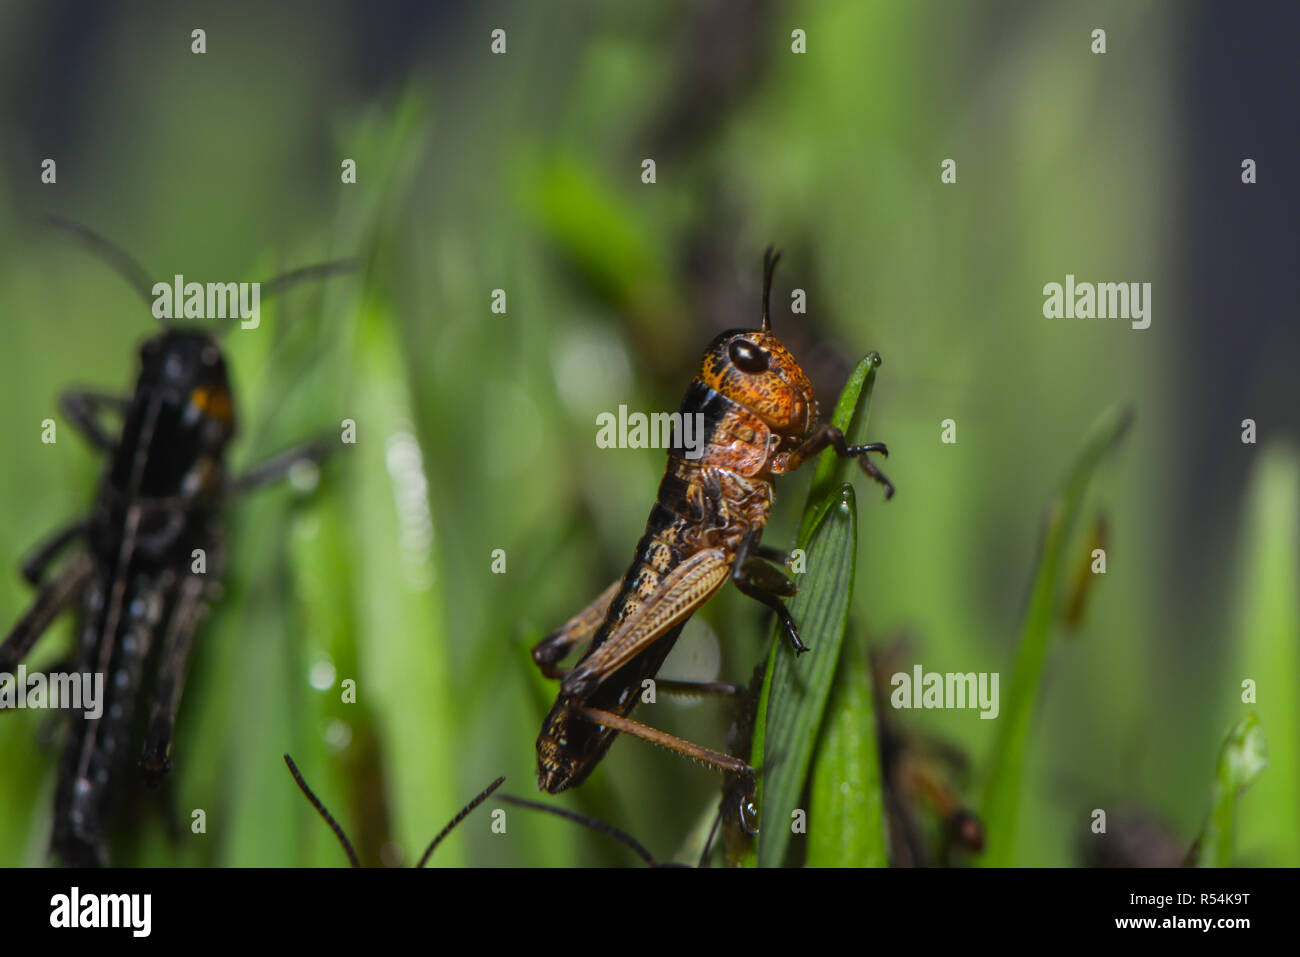 grasshoppers in the grass Stock Photo